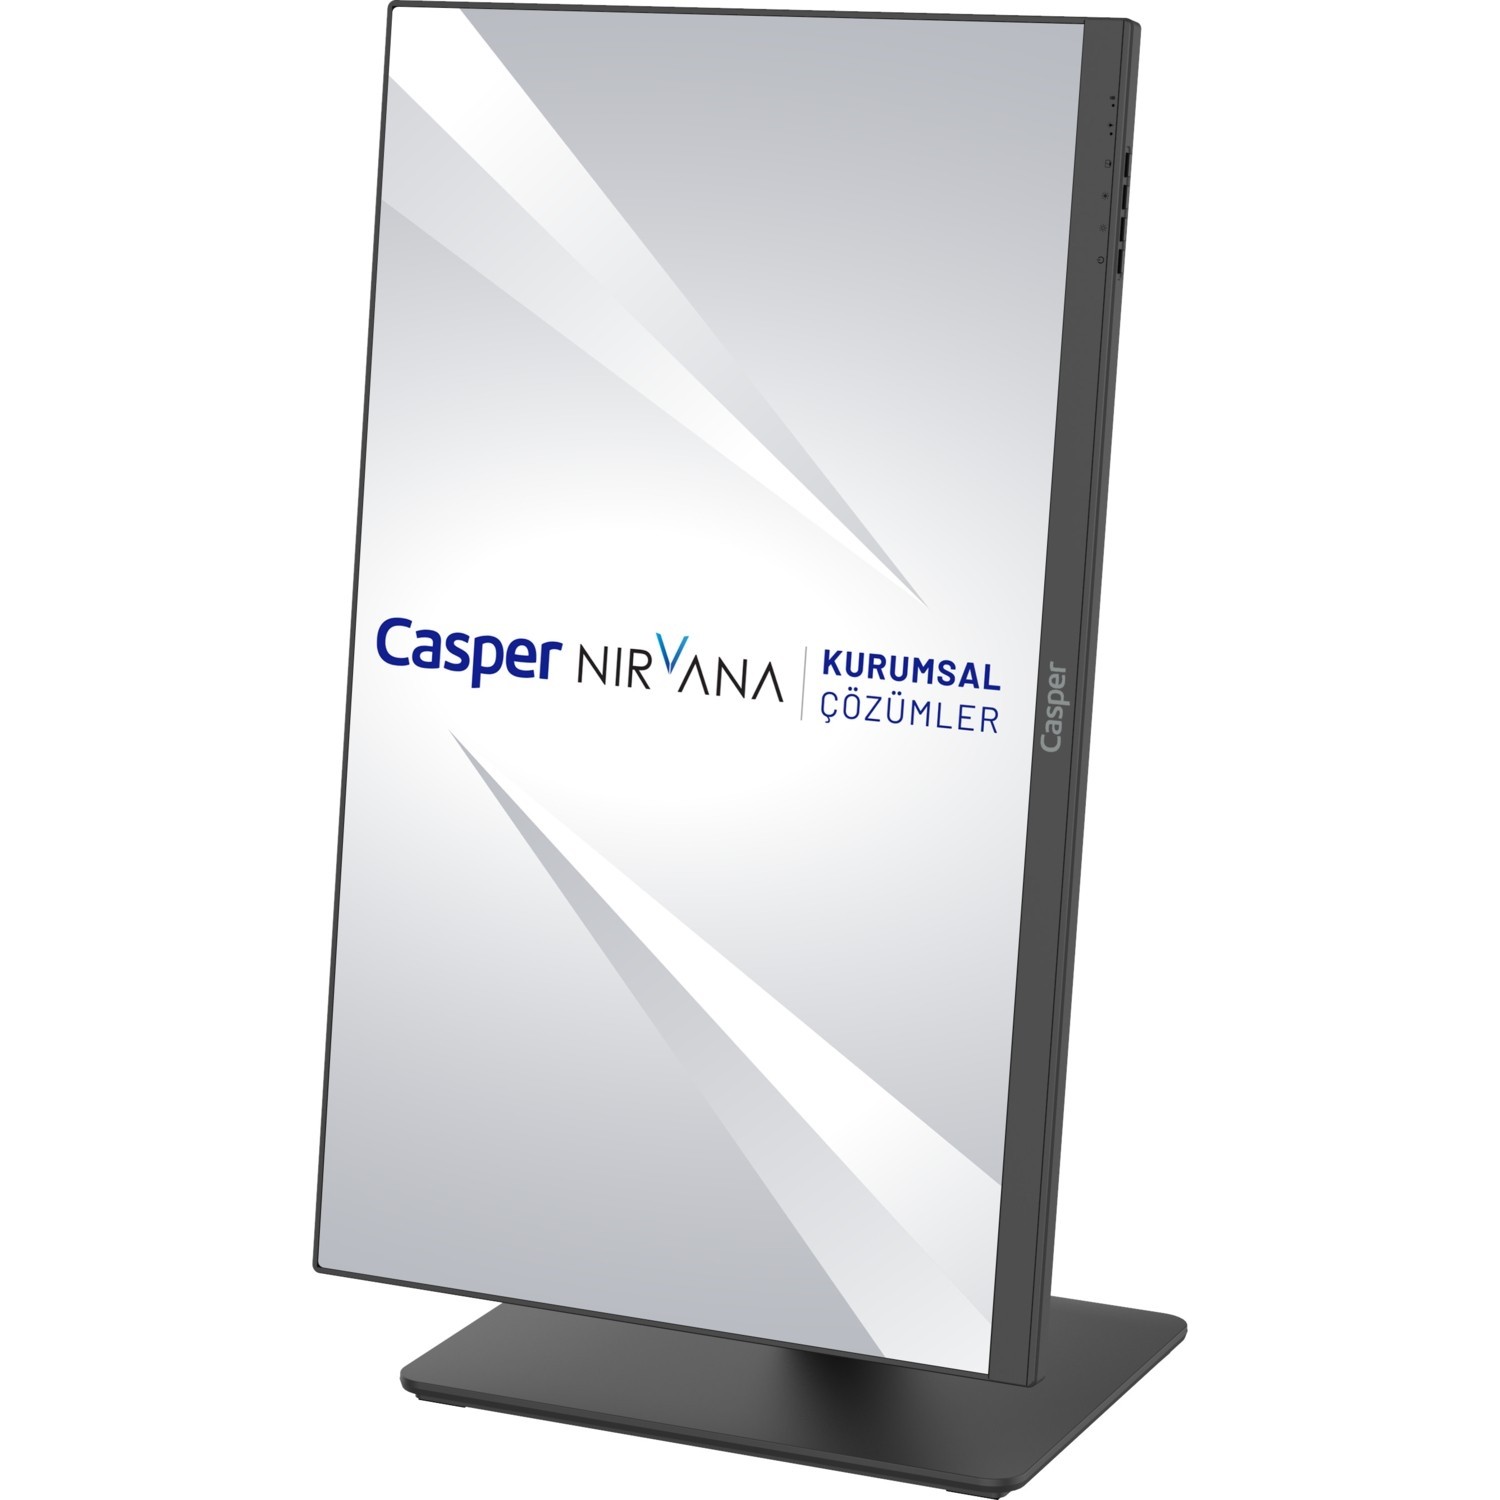 CASPER%20A70.1135-8V00X-V%20NIRVANA%20ONE%20A700%20I5-1135G7%208GB%20256GB%20SSD%20O/B%20VGA%2023.8’’%20FHD%20IPS%20NONTOUCH%20FREDOOS%20ALL%20IN%20ONE%20PC